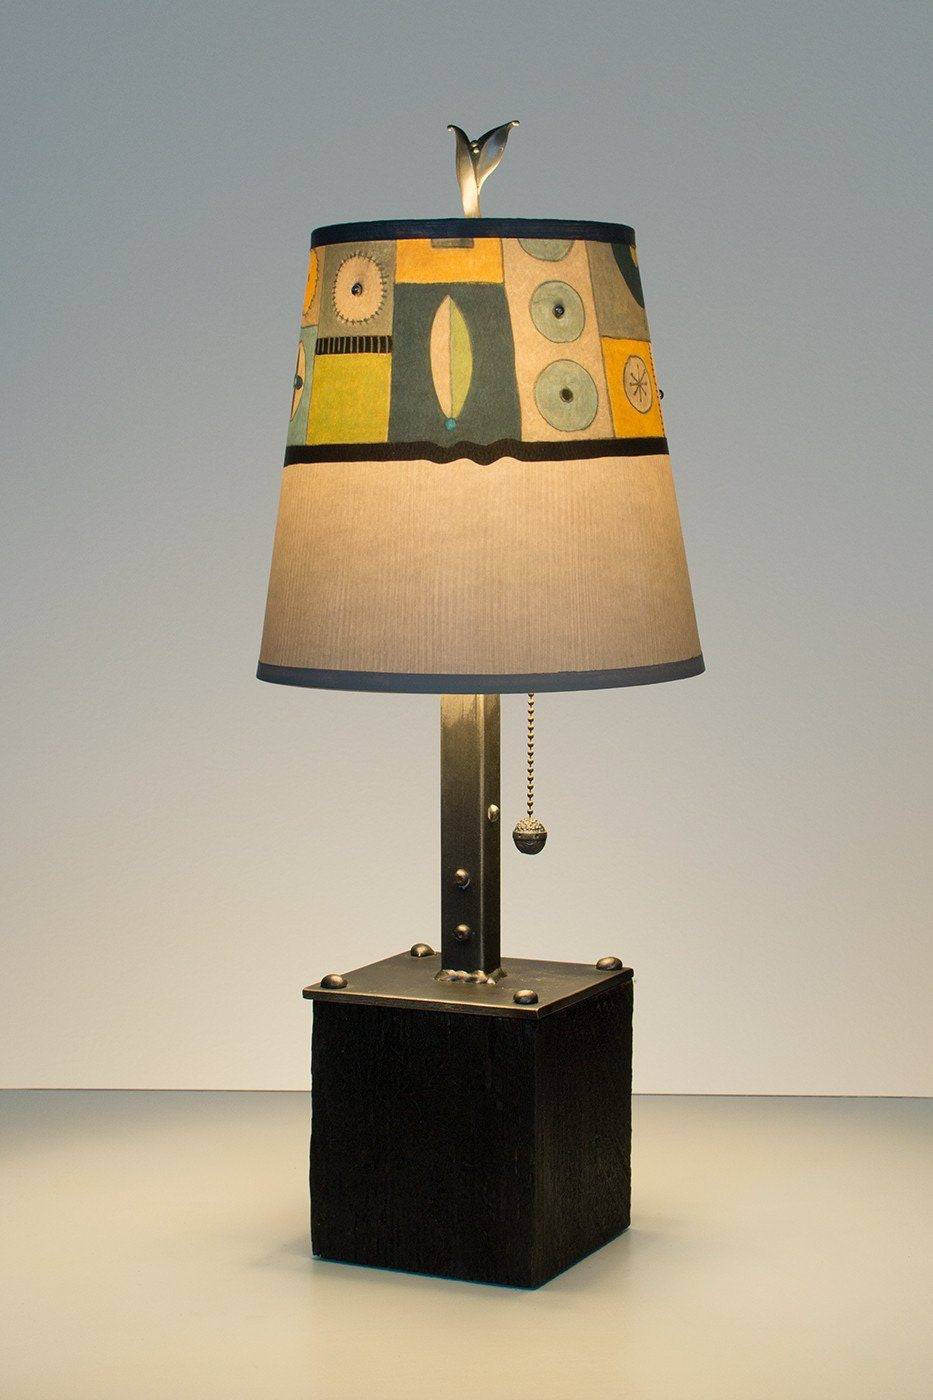 Janna Ugone &amp; Co Table Lamps Steel Table Lamp on Reclaimed Wood with Small Drum Shade in Lucky Mosaic Oyster